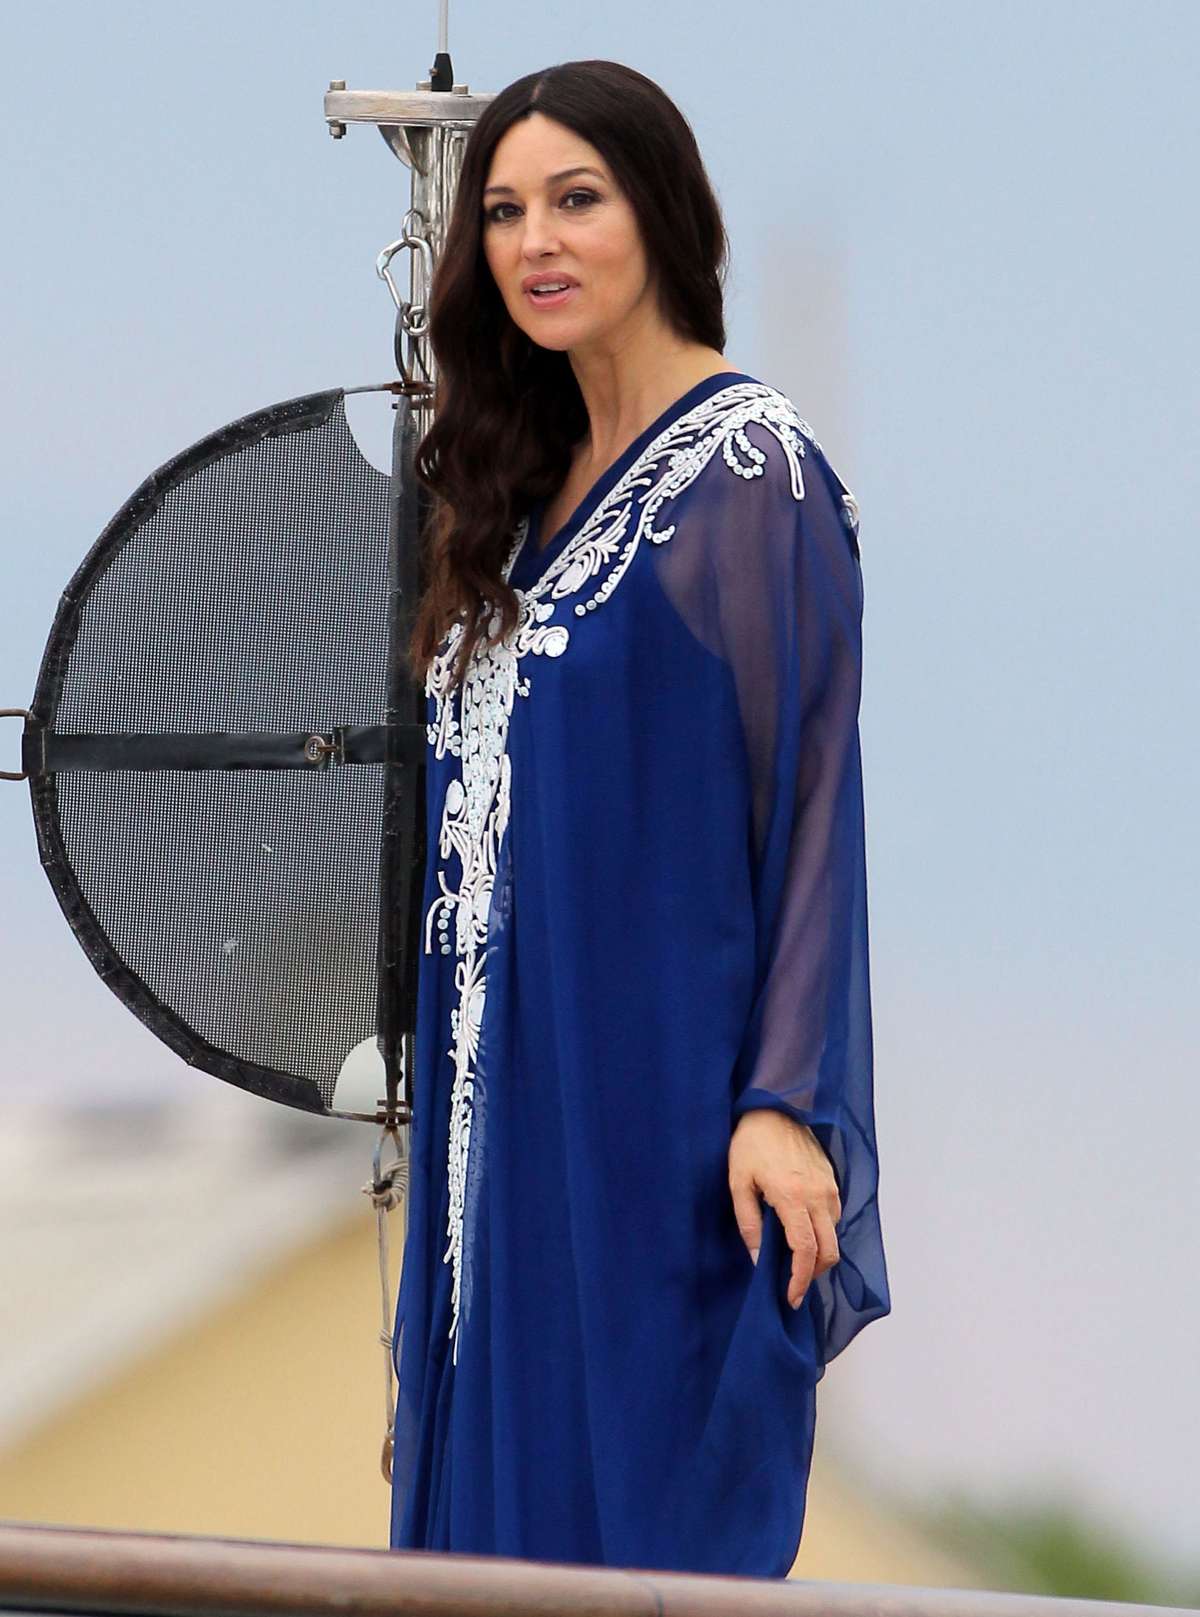 Monica Bellucci - Filming "Des Gens Qui S'Embrassent" on a yacht in St. Tropez